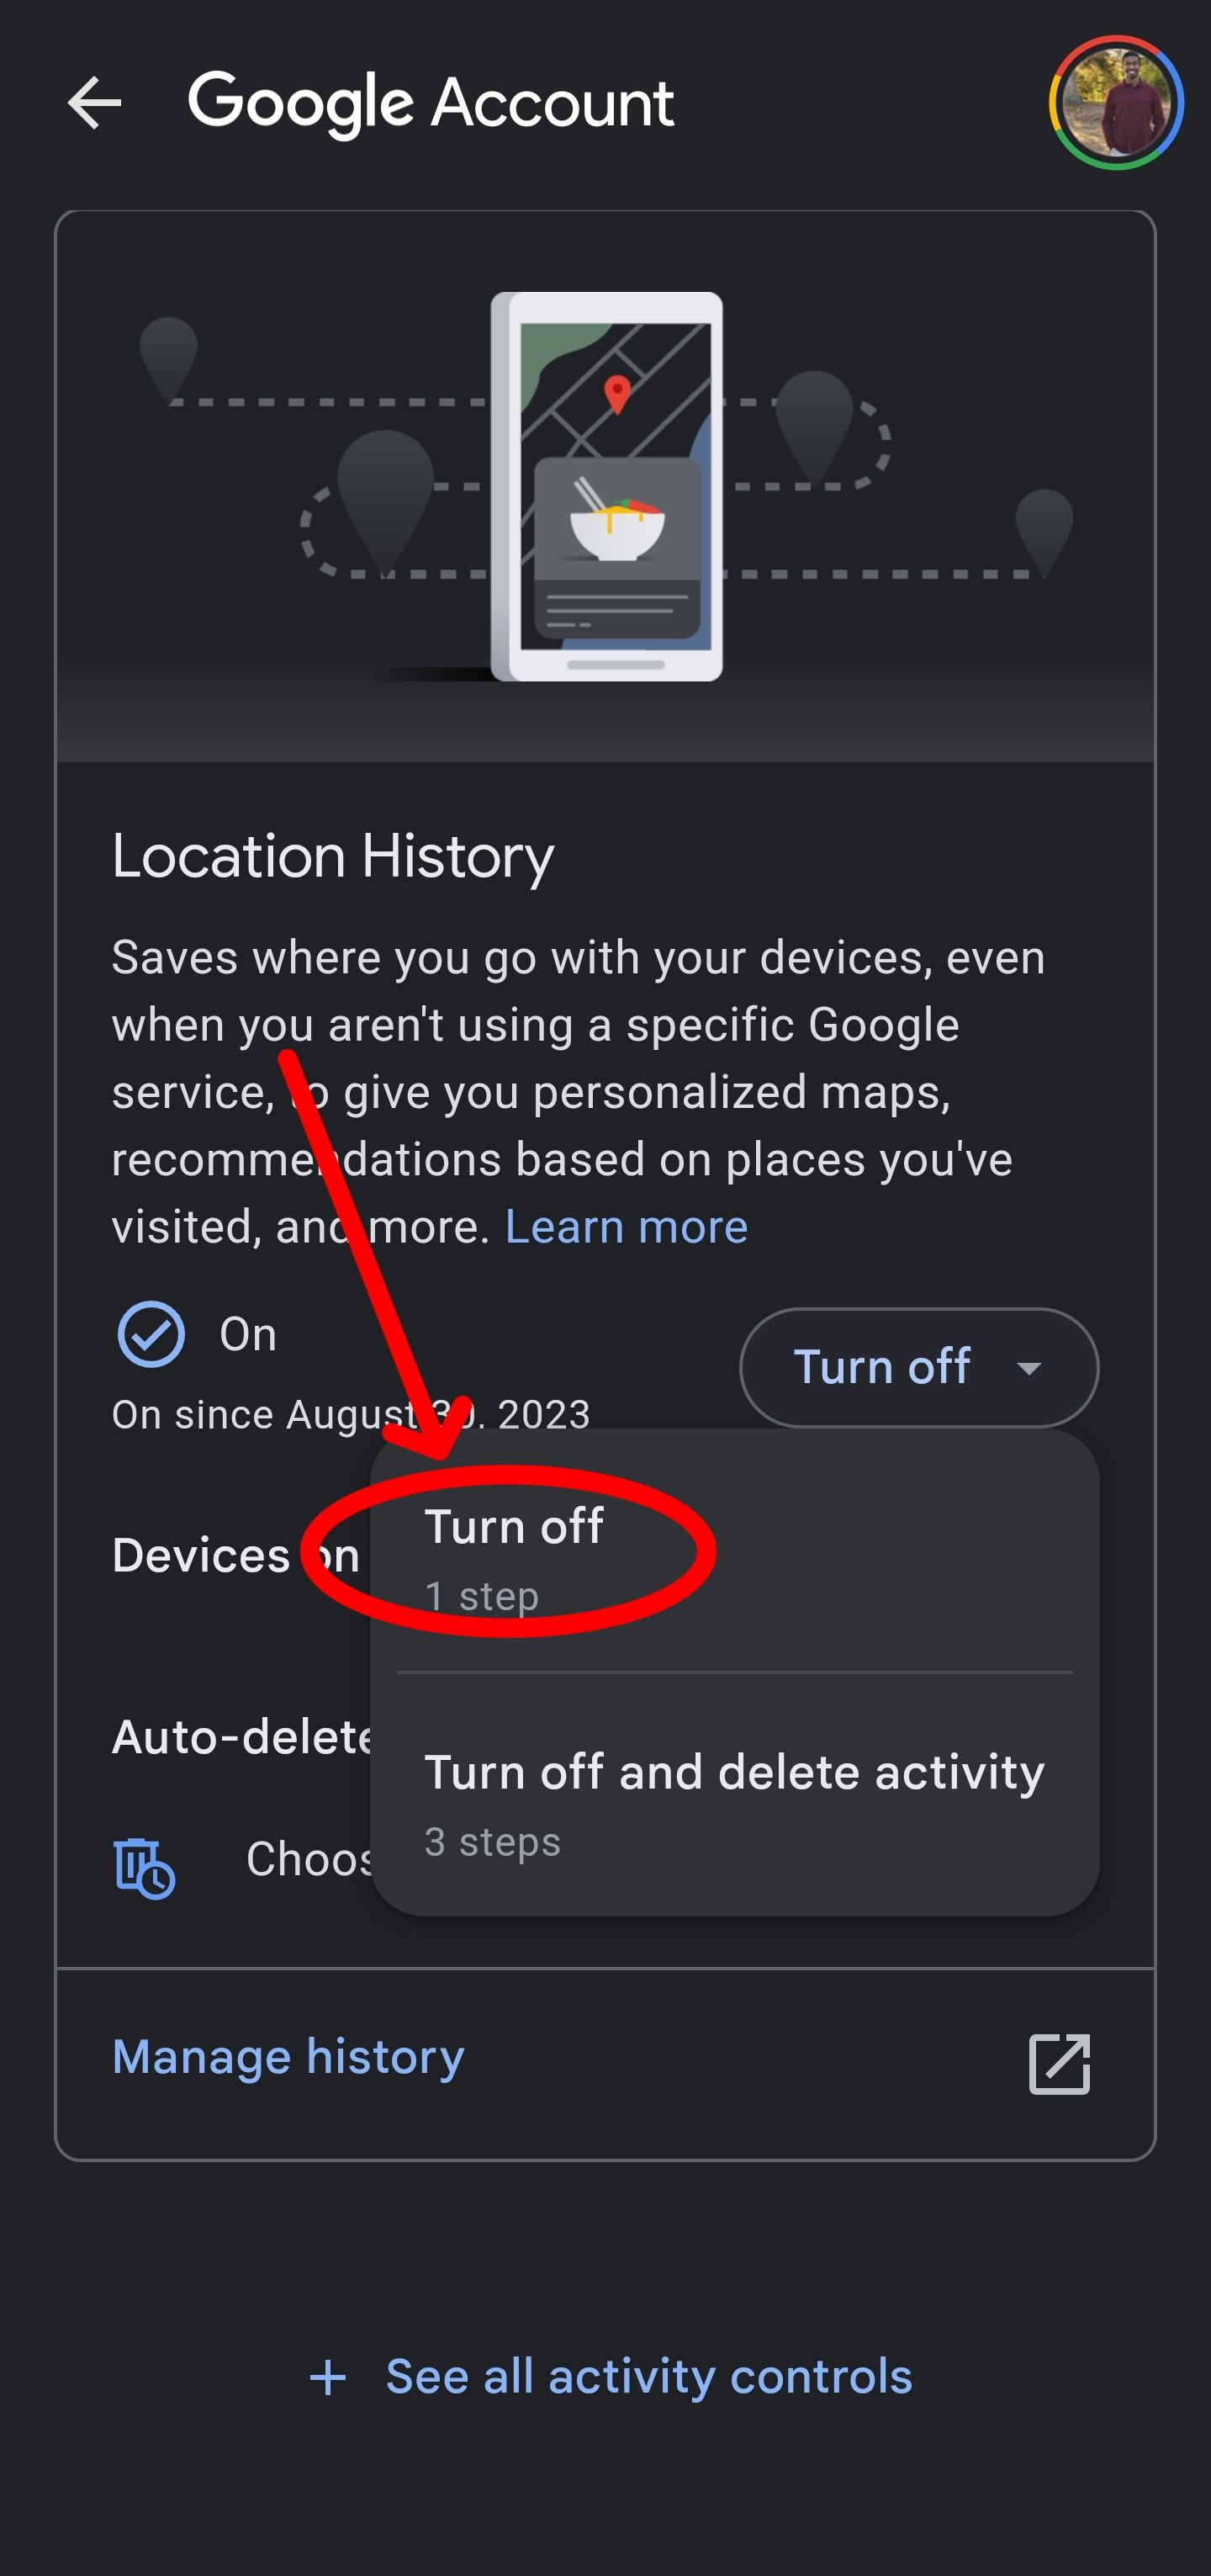 Tap Turn off to deactivate the location services.